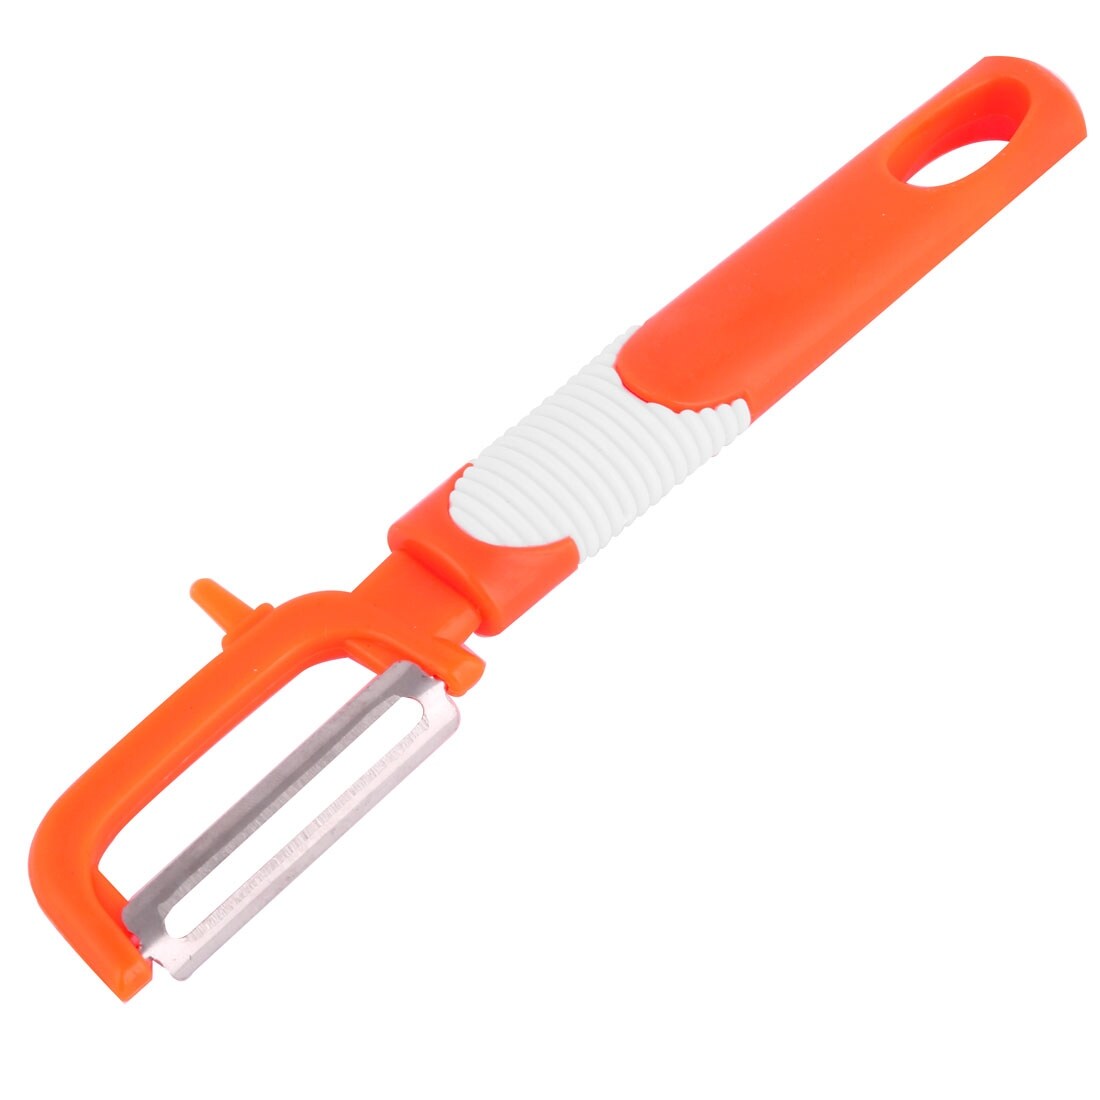 https://ak1.ostkcdn.com/images/products/is/images/direct/ae1f72bf001fbb95279d2f0e501be08e0bf321a4/Kitchen-Plastic-Handle-Apple-Potato-Fruit-Vegetable-Peeler-Tool-Orange.jpg